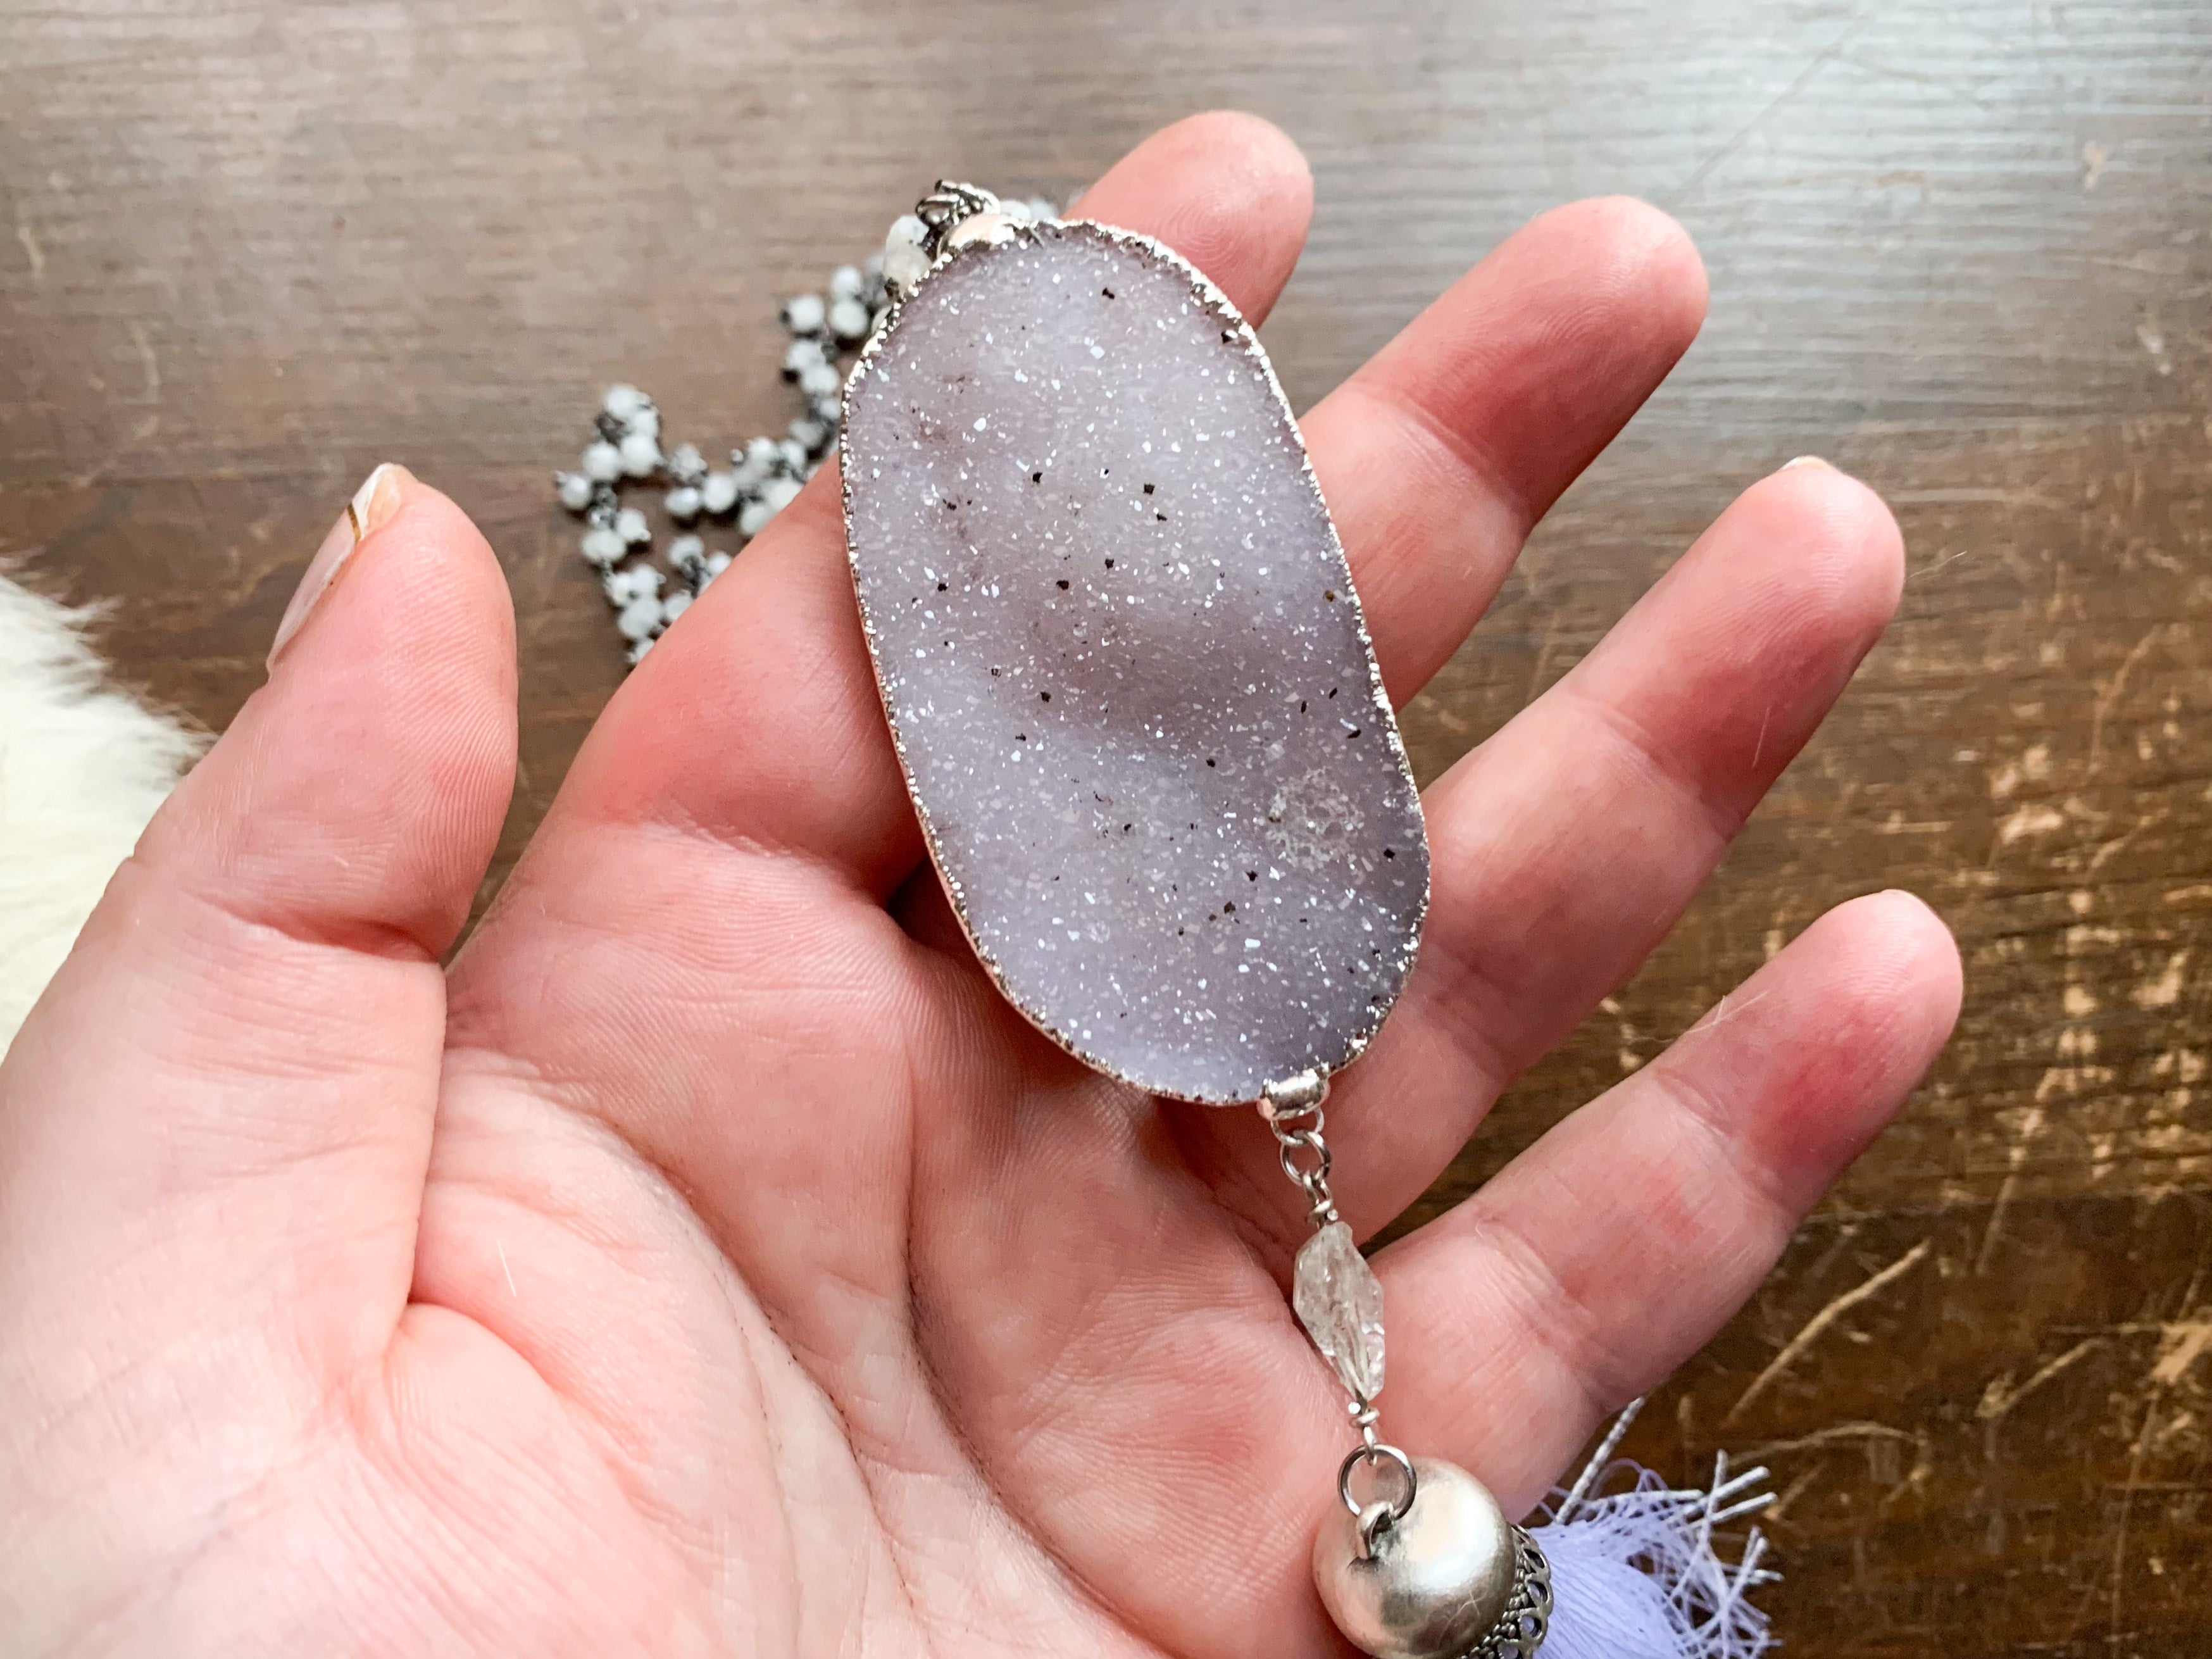 Mala inspired necklace with white druzy and rainbow moonstone